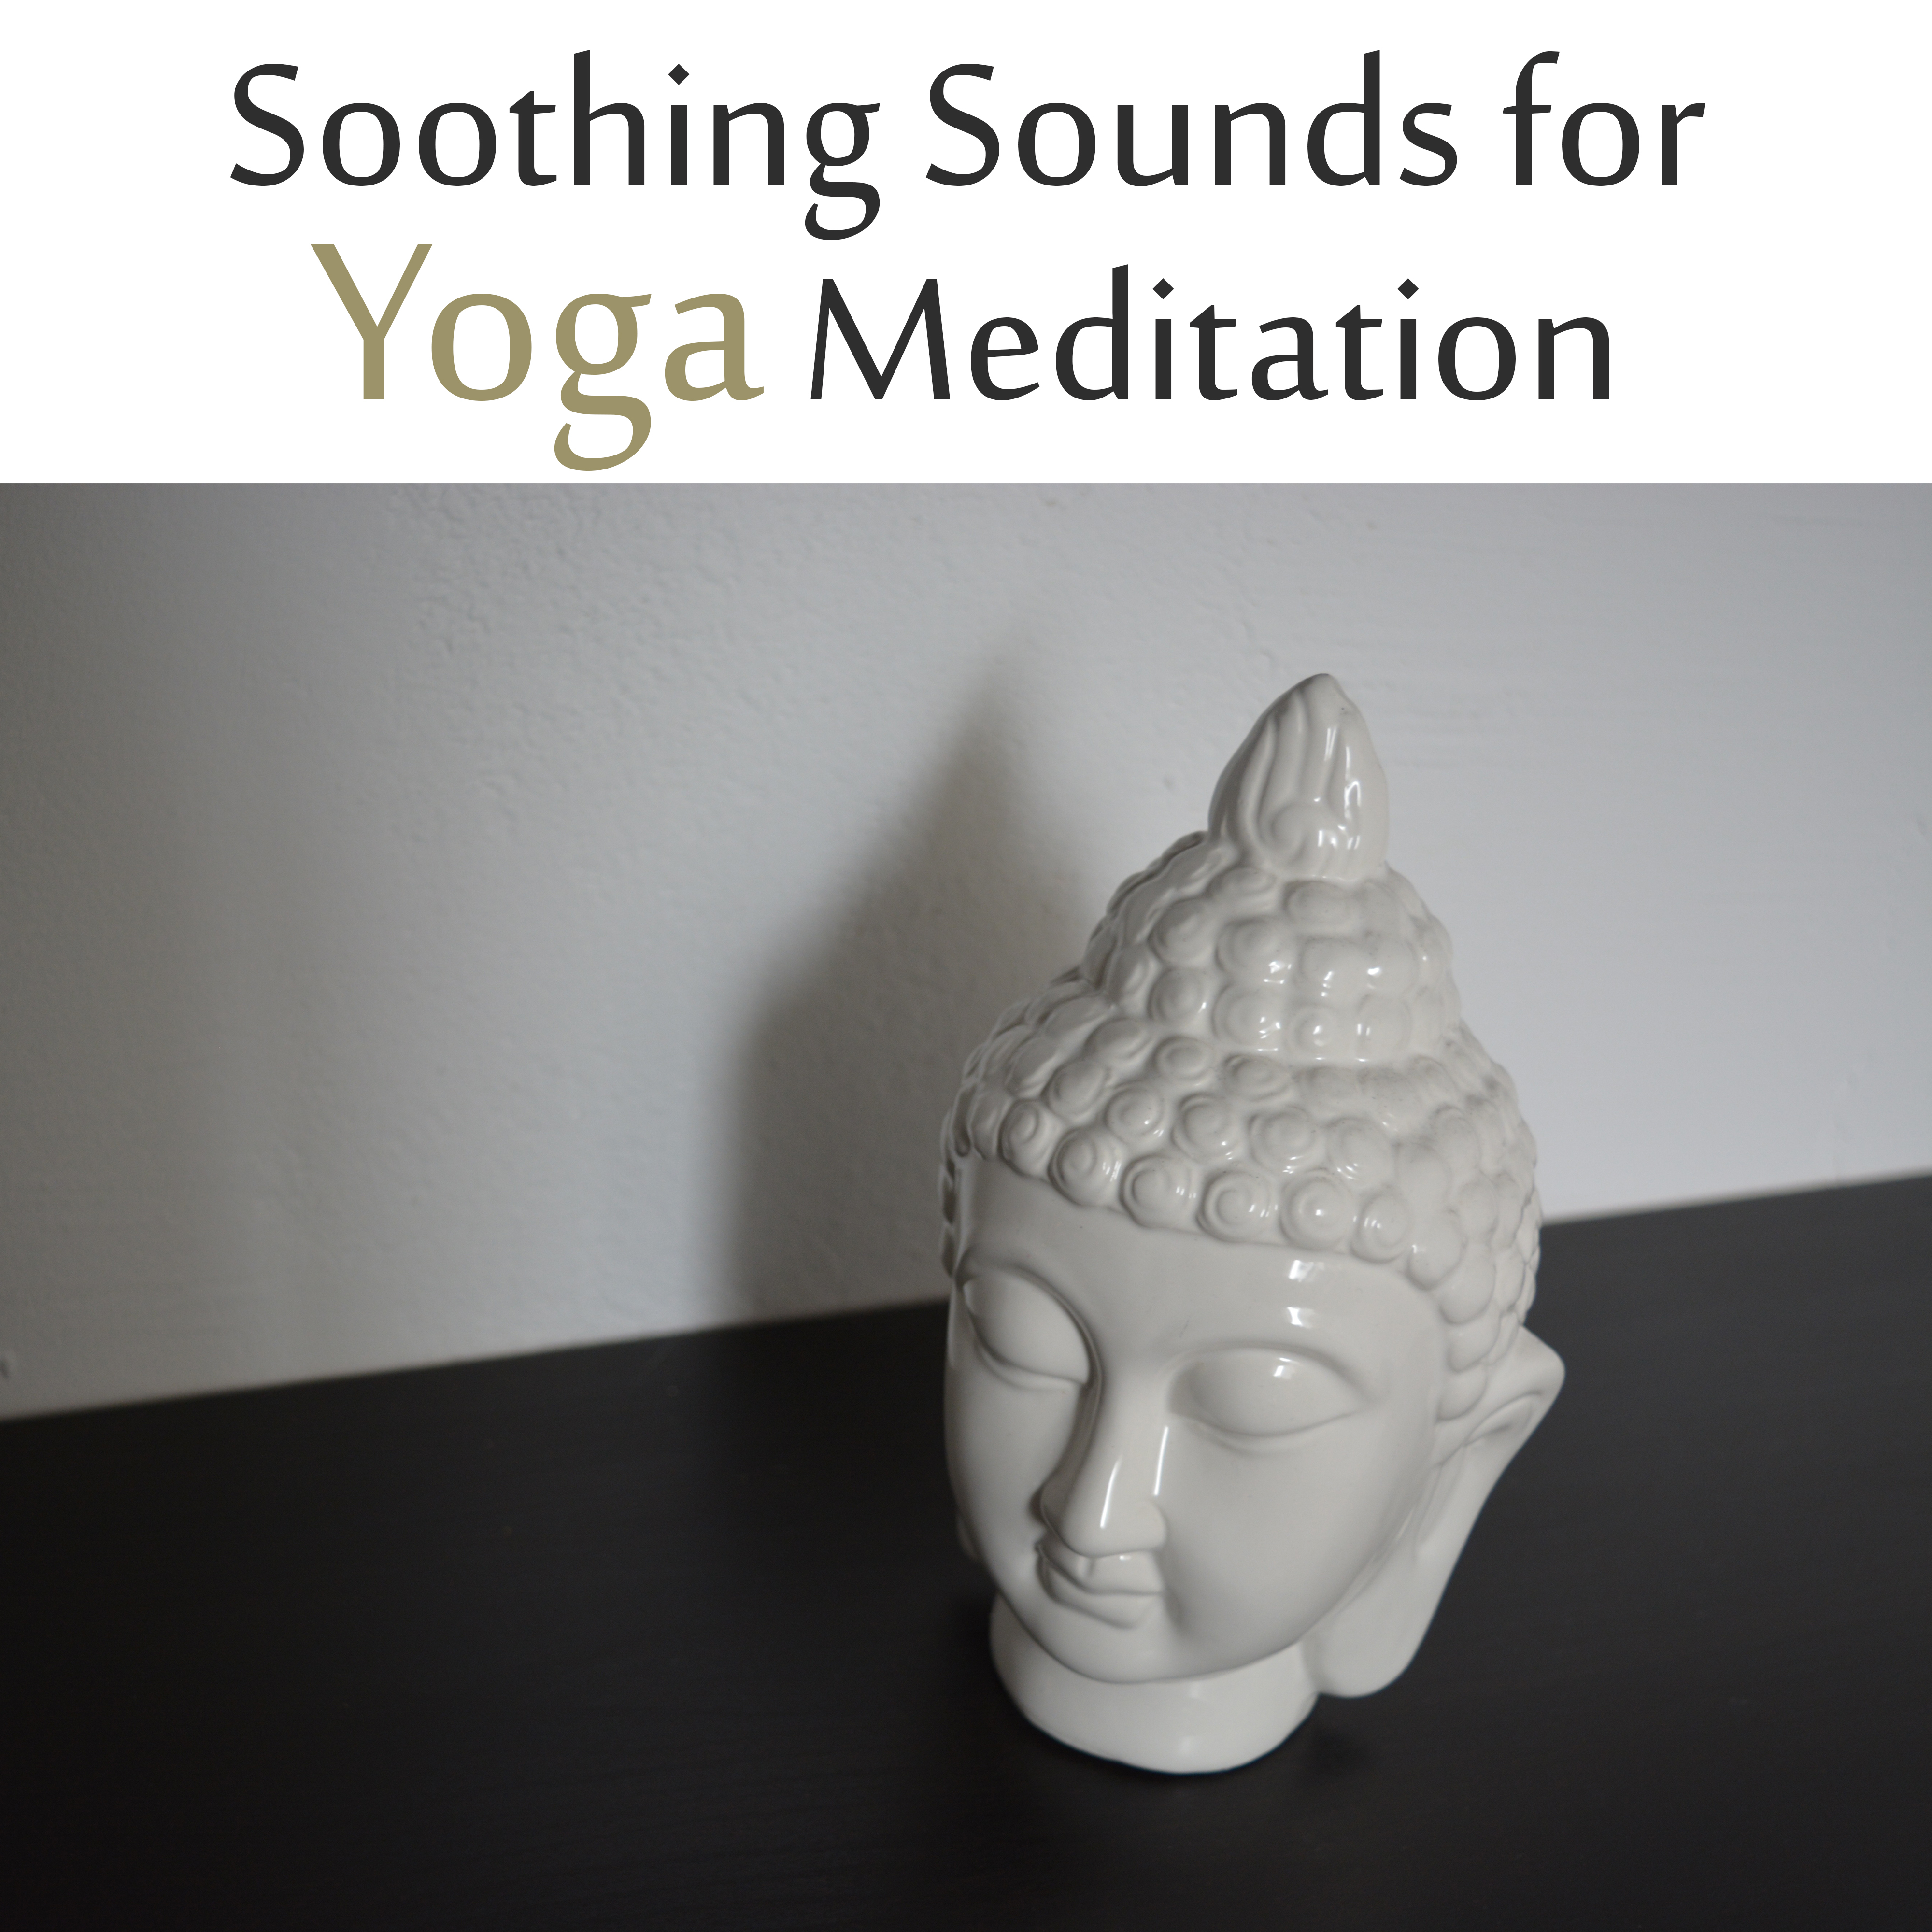 Soothing Sounds for Yoga Meditation  Easy Listening, Meditation Sounds for Mind Calmness, Inner Journey, Soft New Age Melodies